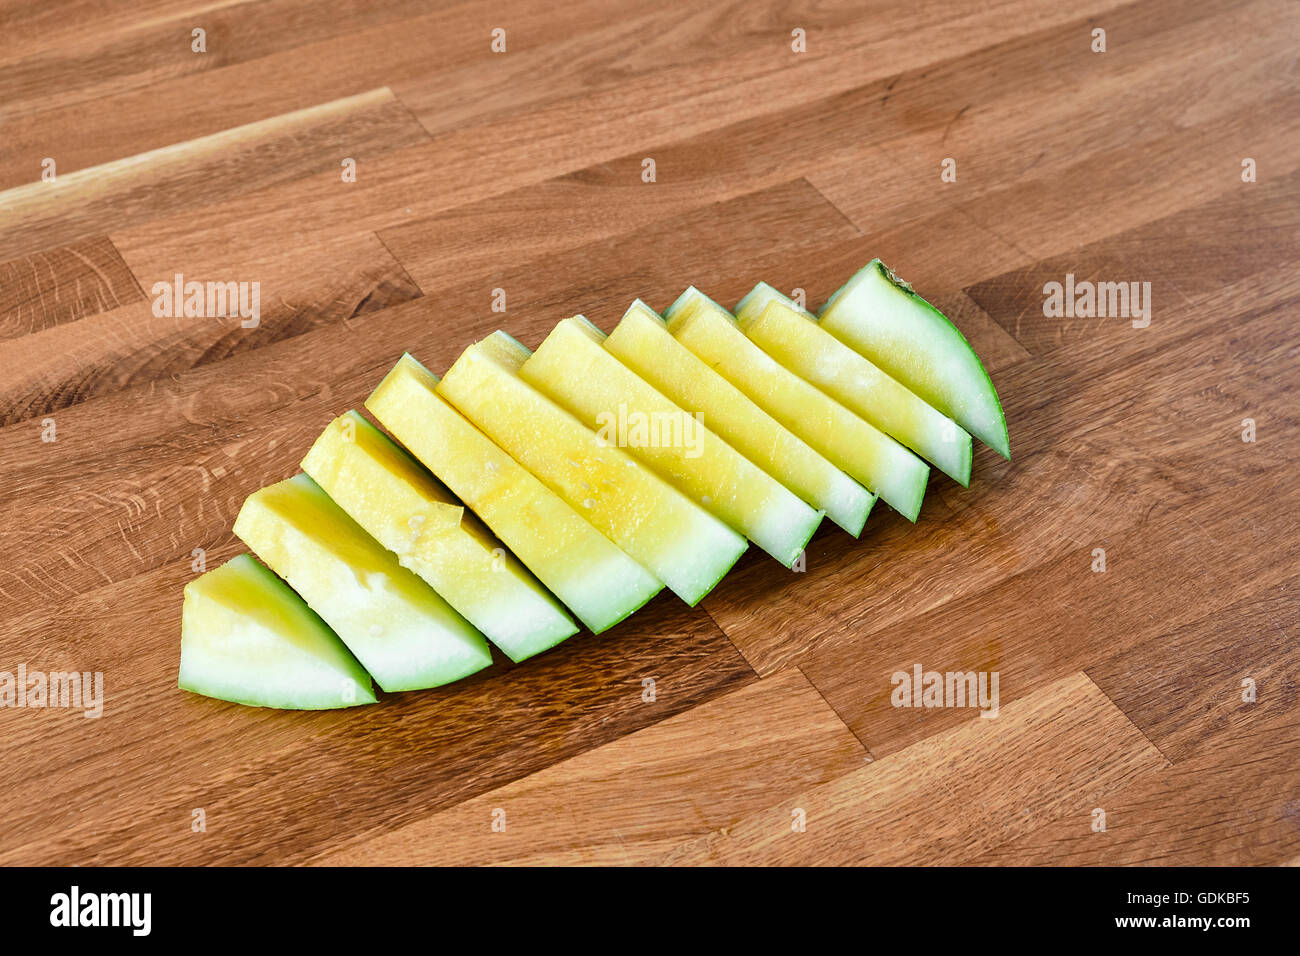 Yellow watermelon sliced in pieces, lying on a table of dark brown laminated hardwood Stock Photo